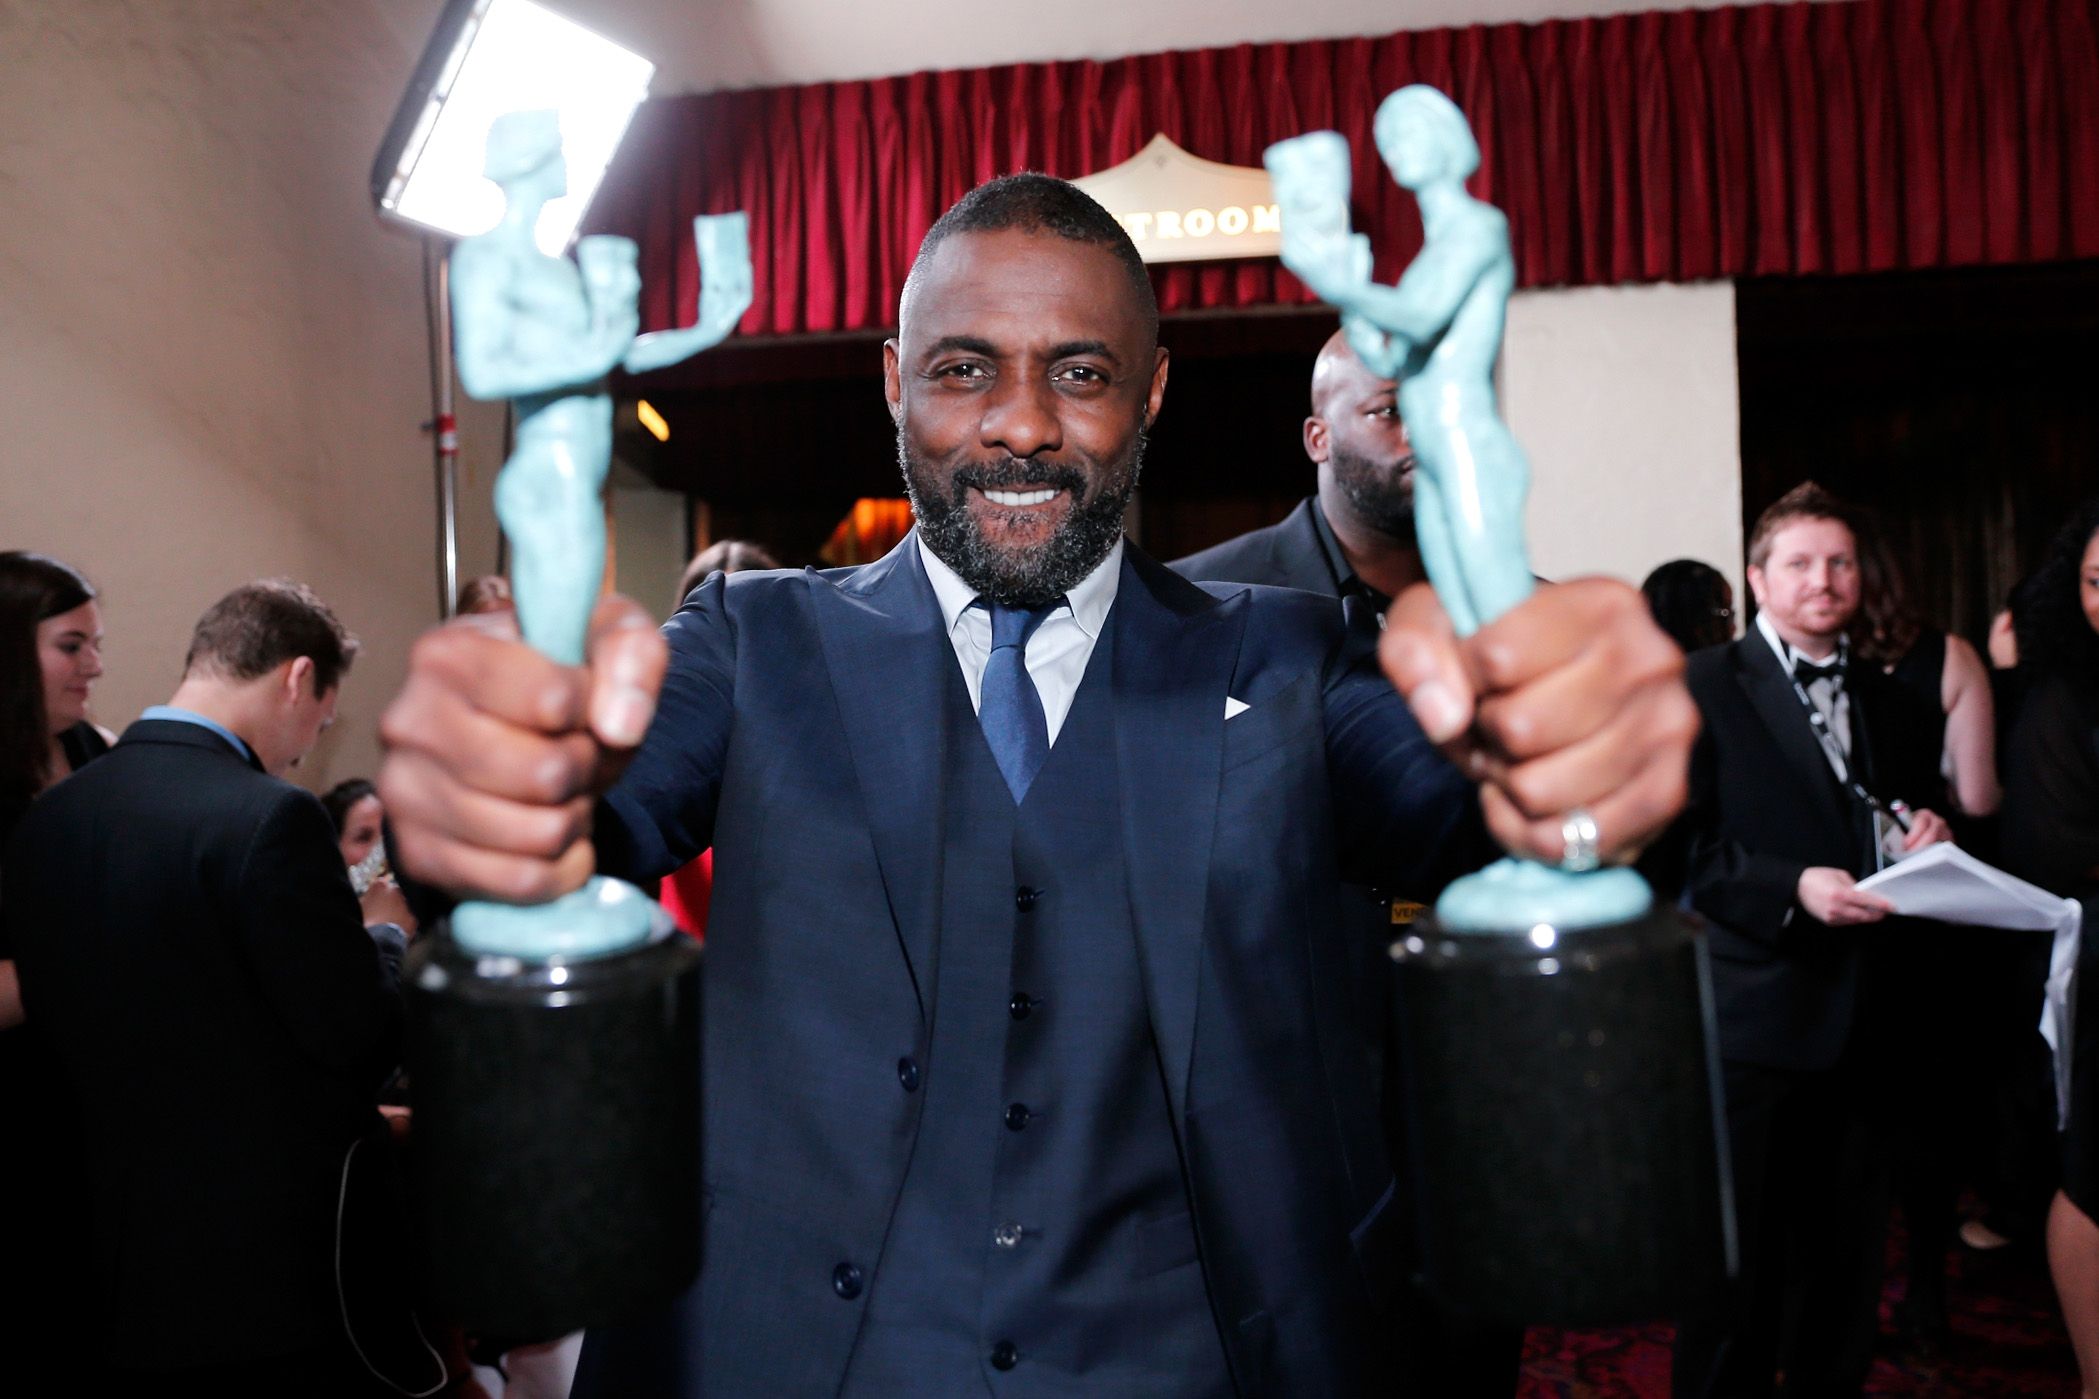 LOS ANGELES, CA - JANUARY 30:  Actor Idris Elba, winner of the awards for Outstanding Performance By a Male Actor in a Supporting Role for 'Beasts of No Nation' and Outstanding Performance By a Male Actor in a Television Movie or Miniseries for 'Luther', attends The 22nd Annual Screen Actors Guild Awards at The Shrine Auditorium on January 30, 2016 in Los Angeles, California. 25650_017  (Photo by Rich Polk/Getty Images for Turner)